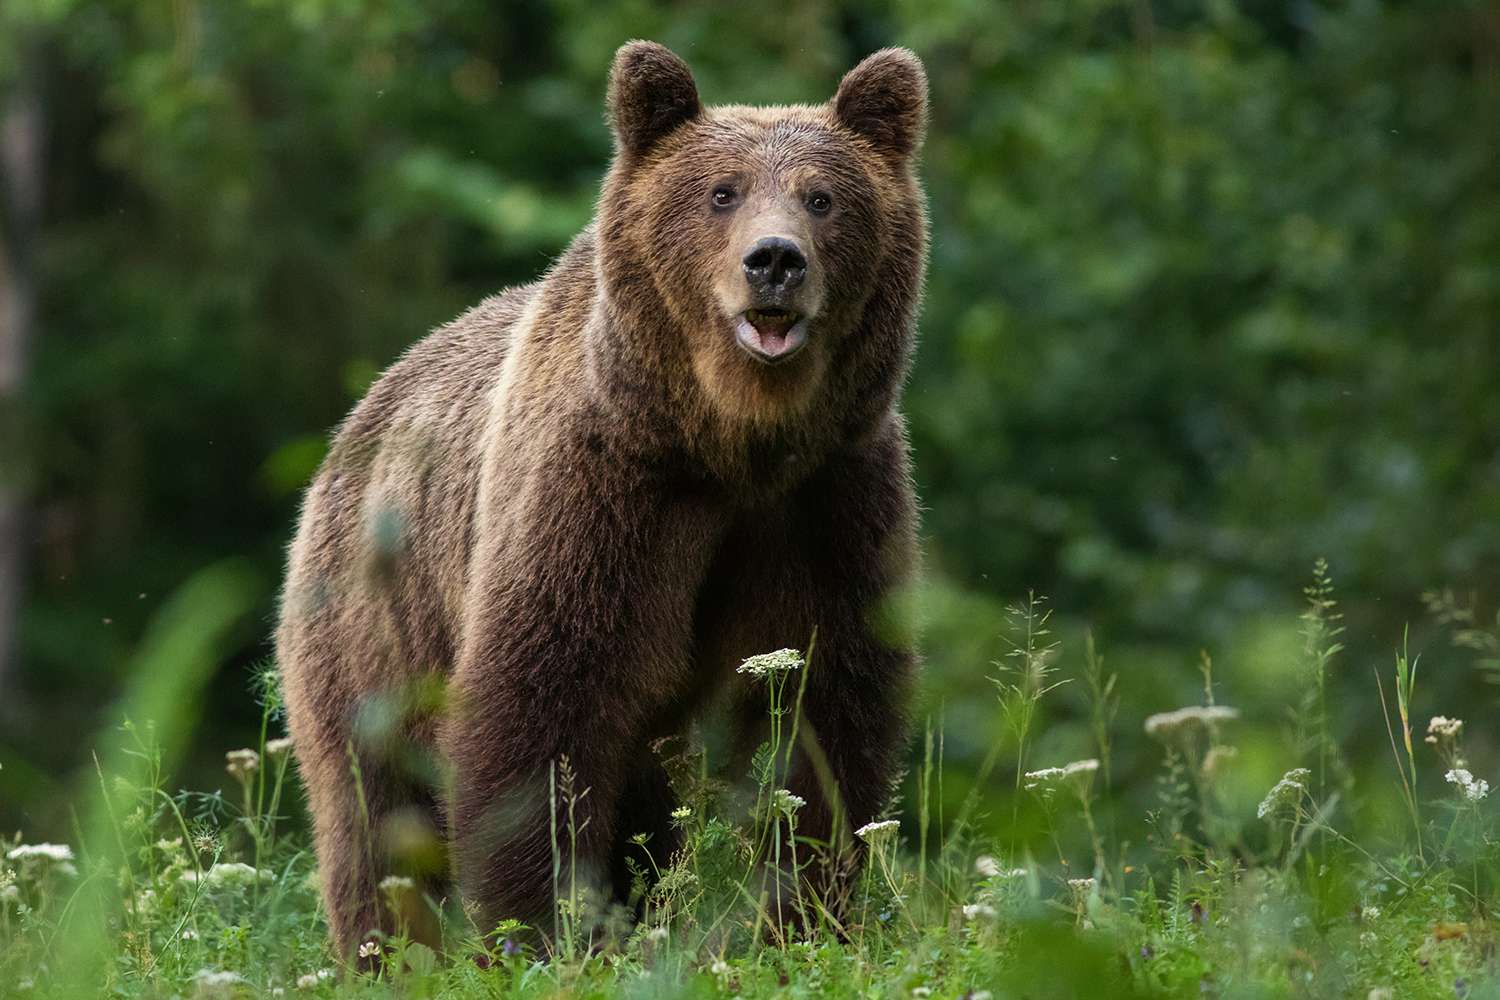 Teen Made Frantic Call to Police Before Rabid Bear Tossed Her 400-Feet to Her Death: Reports